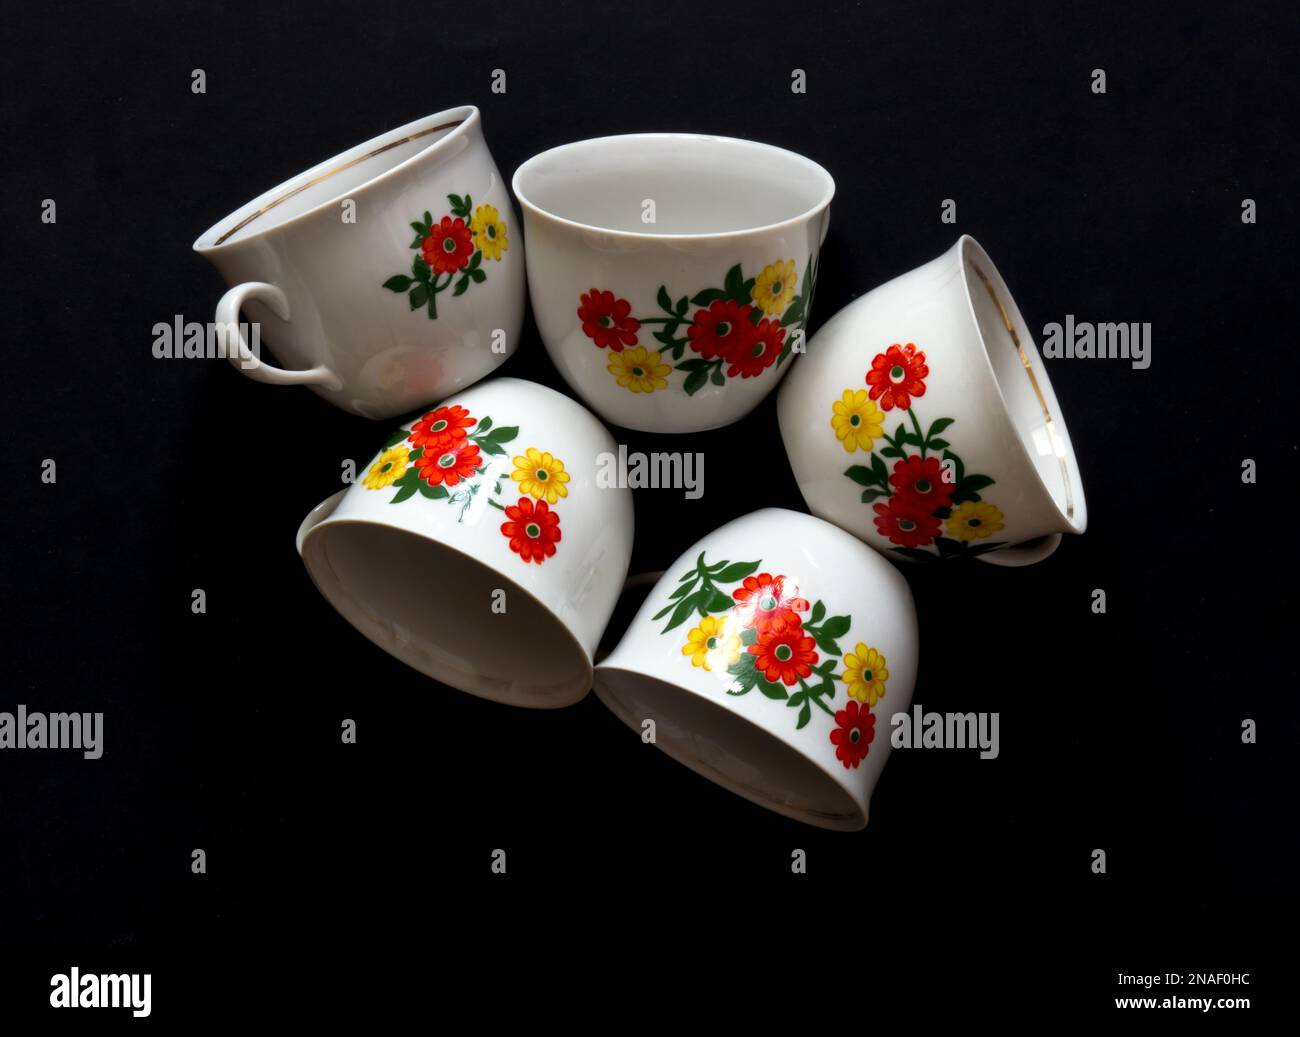 Porcelain, made in Soviet times. Soviet Union was a socialist state on the Eurasian continent that existed between 1922 and 1991. Stock Photo